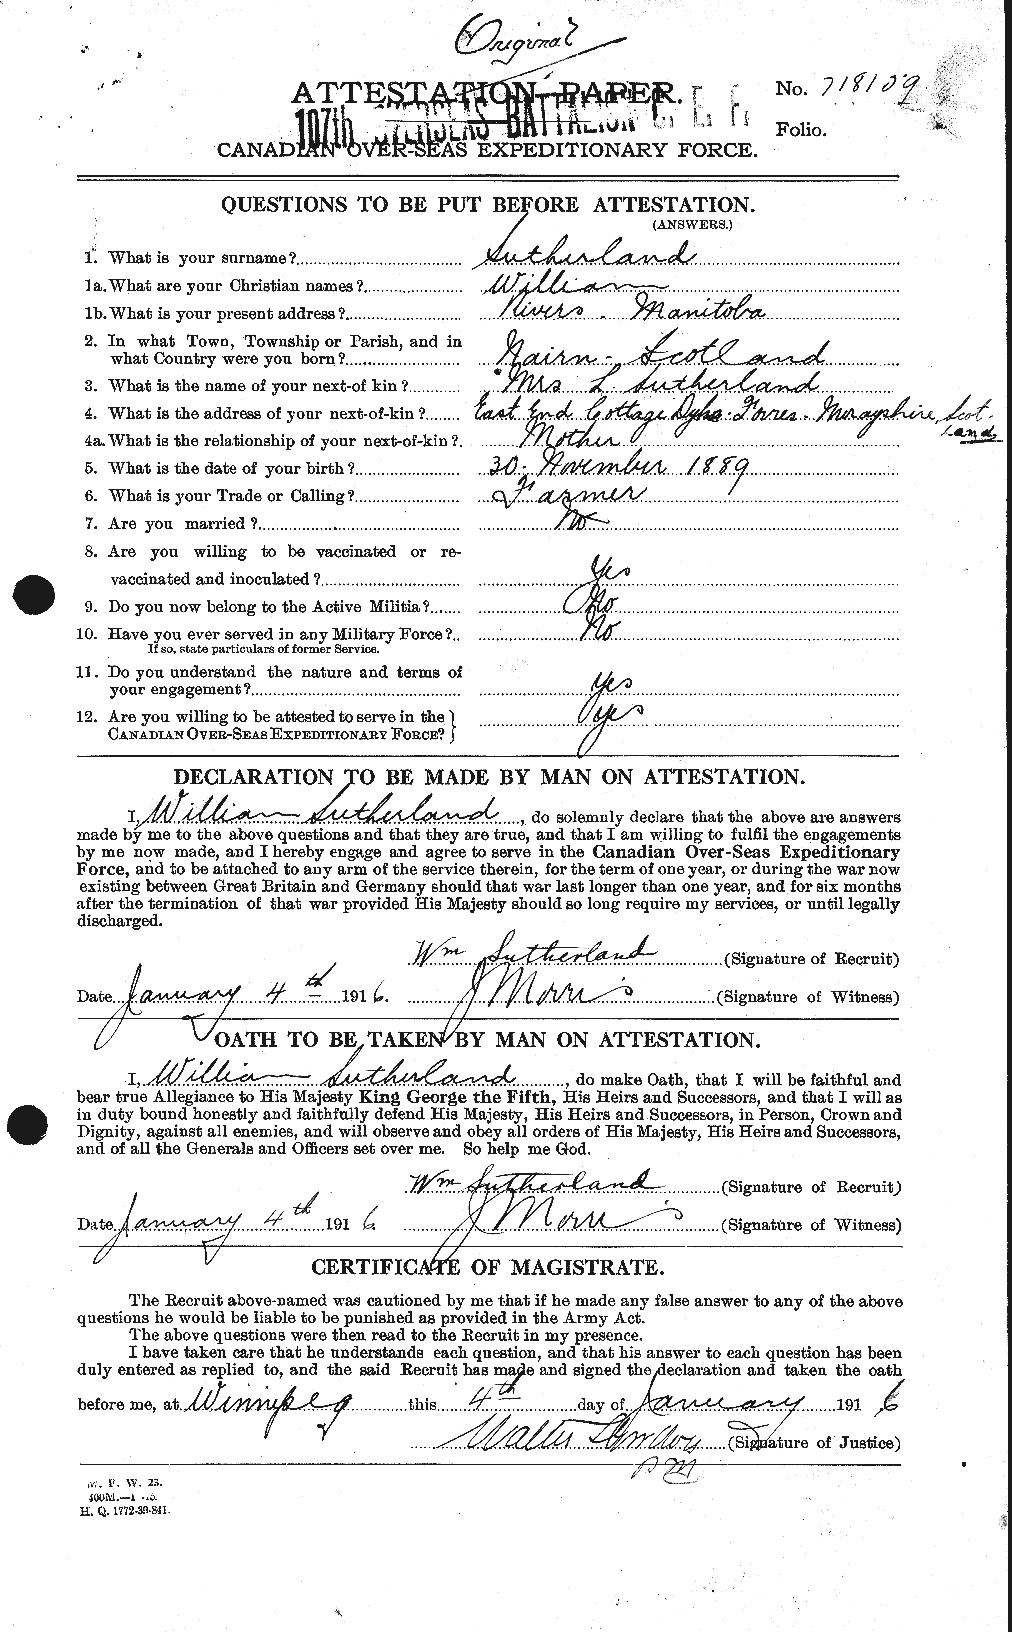 Personnel Records of the First World War - CEF 624670a